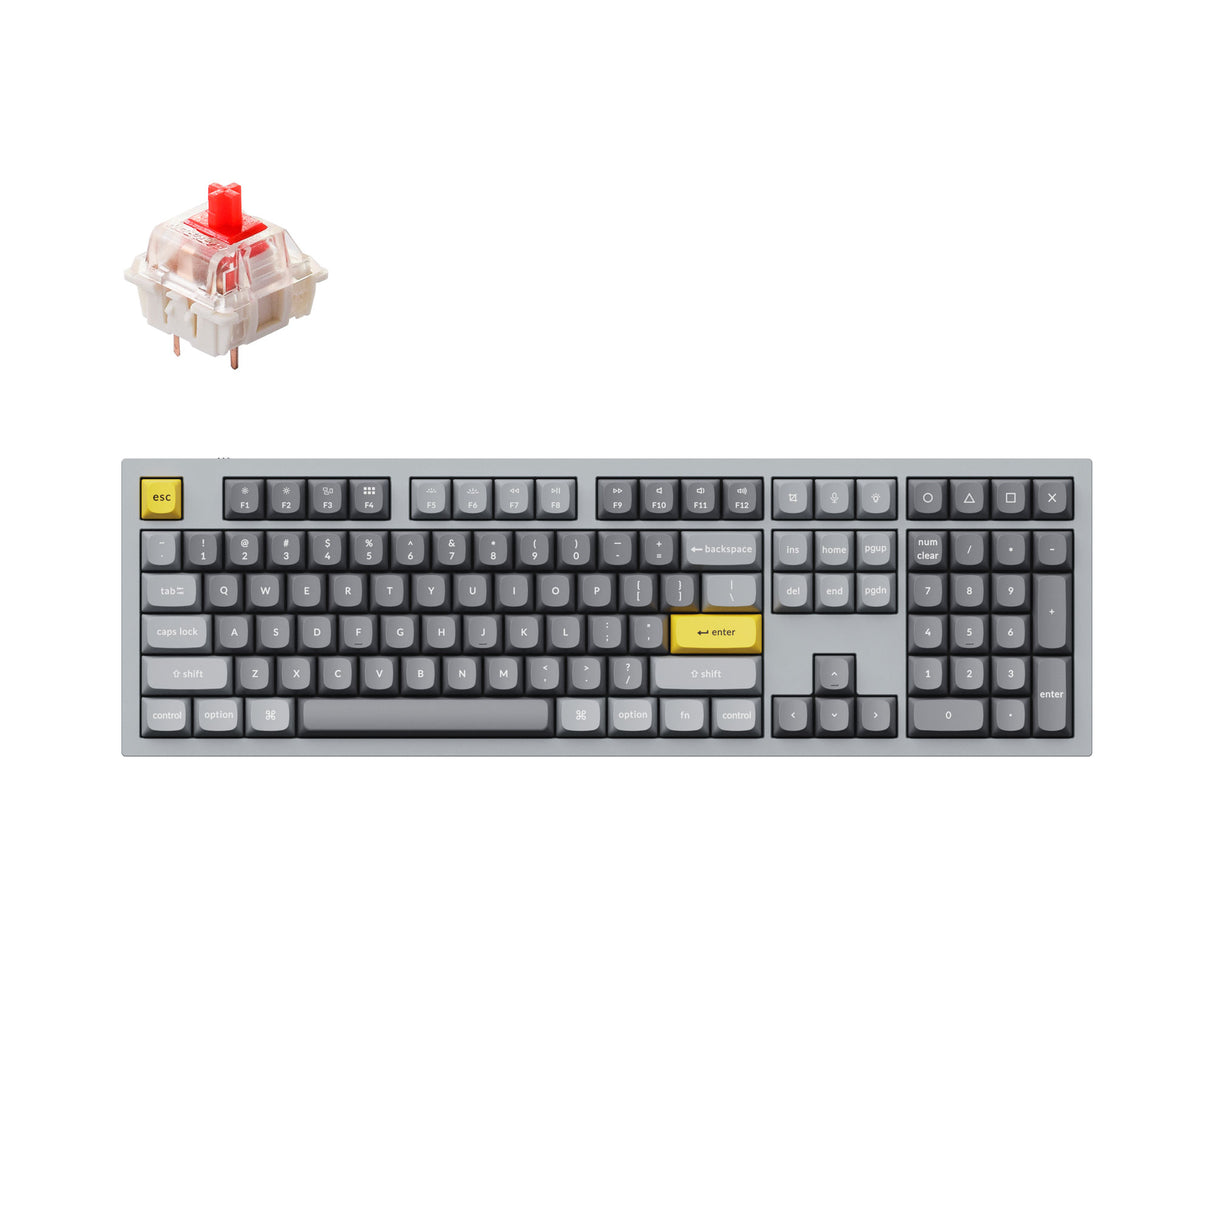 Keychron Q6 QMK VIA custom mechanical keyboard full size 100 percent layout full aluminum grey frame for Mac Windows RGB backlight with hot swappable Gateron G Pro switch red